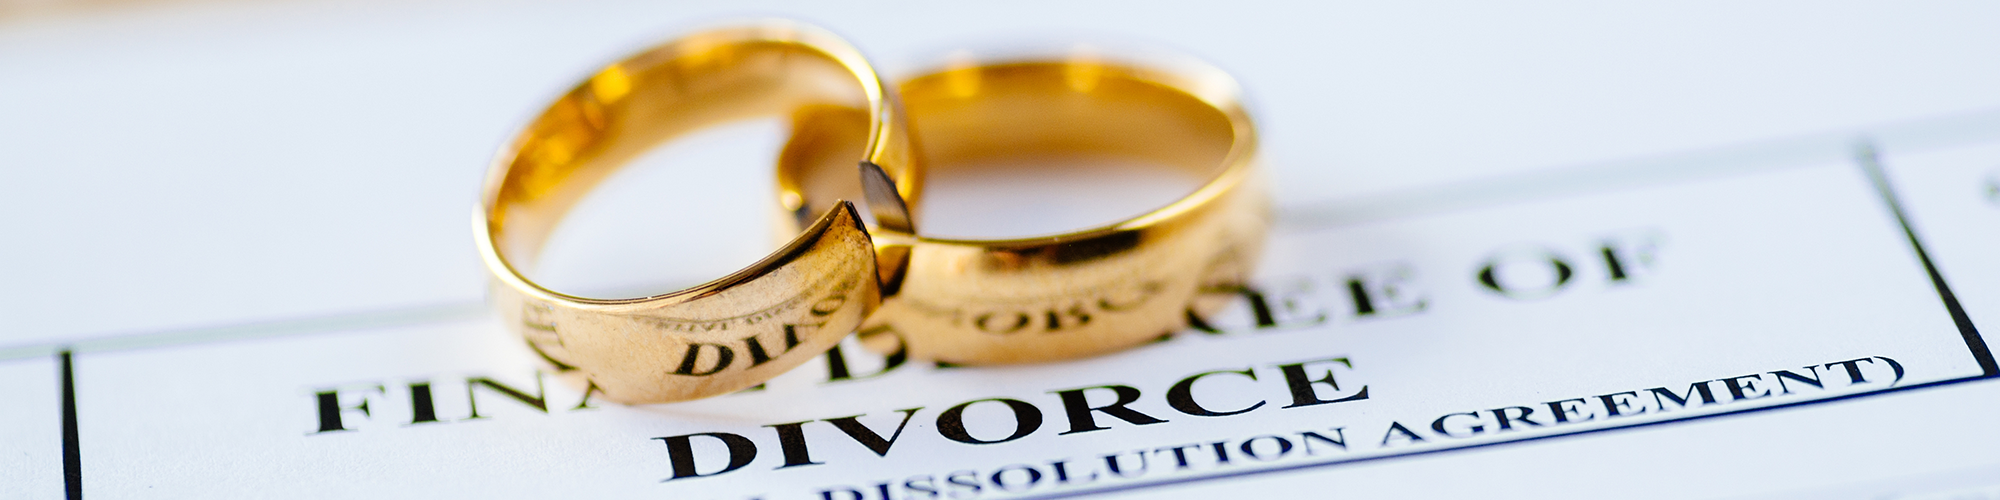 Two cut wedding bands sit on top of divorce papers. Who Gets the House in a Divorce/Dissolution? A guide from SAM Conveyancing